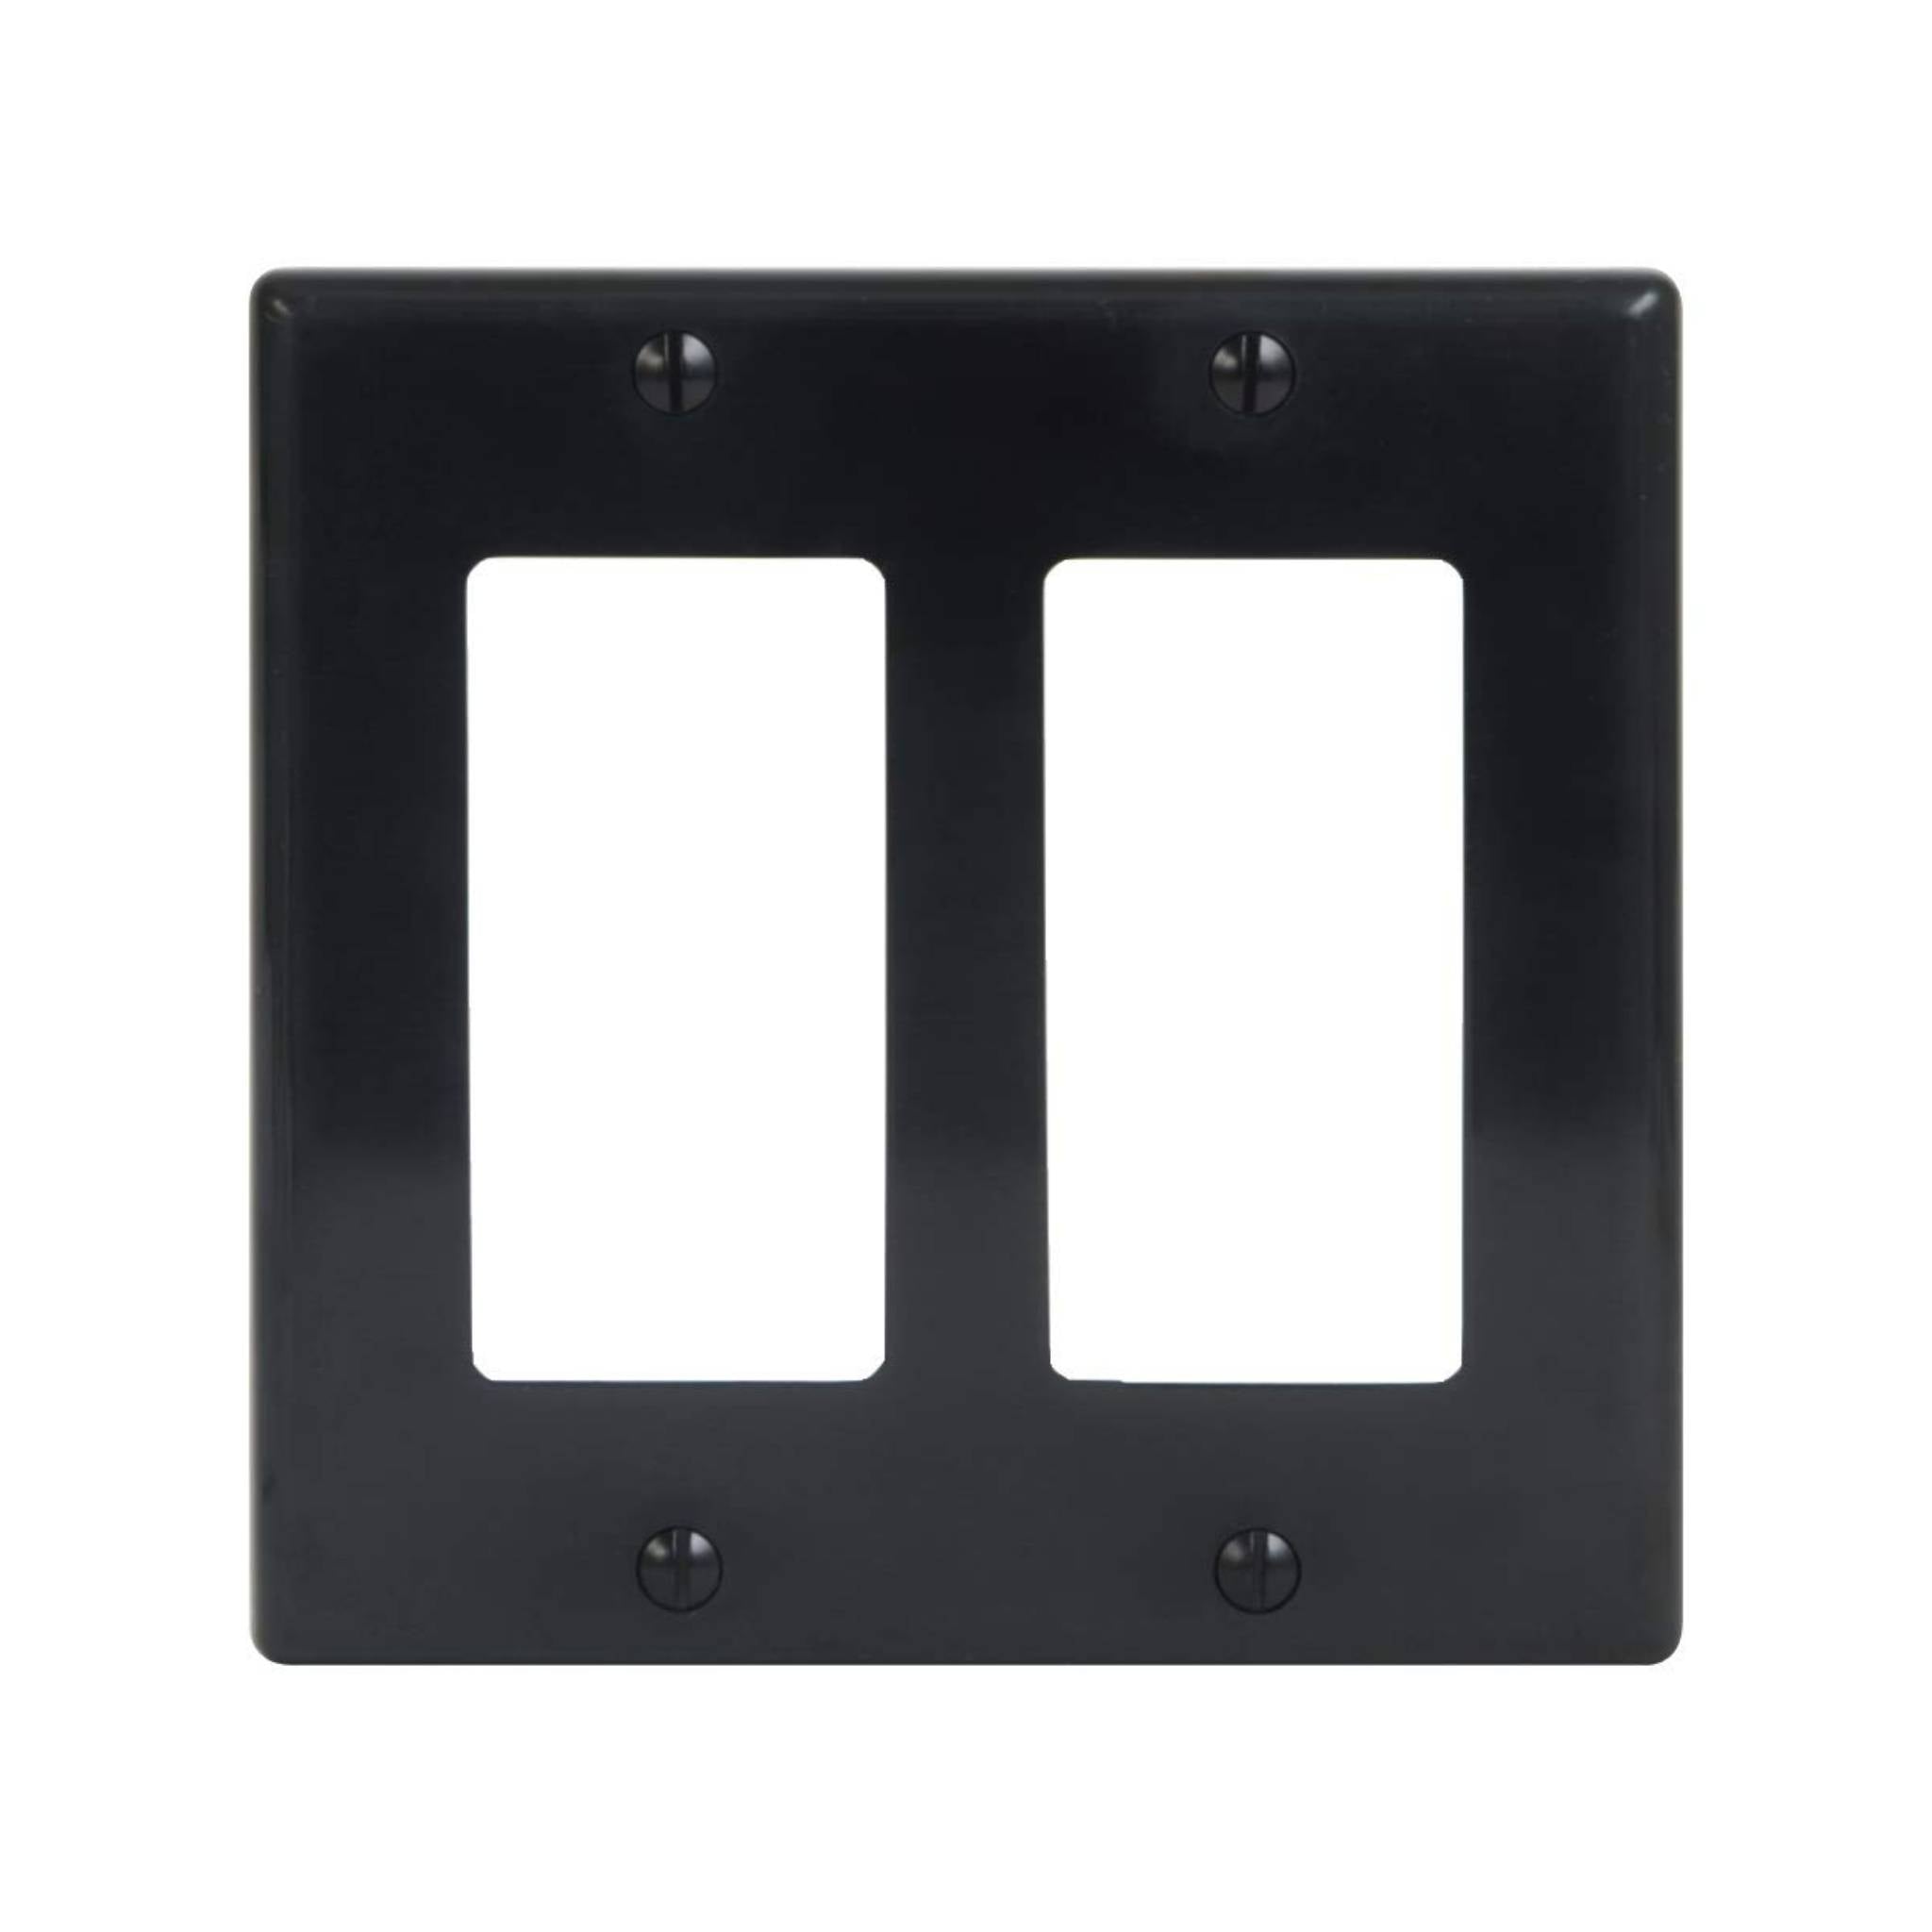 ICC Decorex Faceplate With Two Insert Spaces Double Gang Black